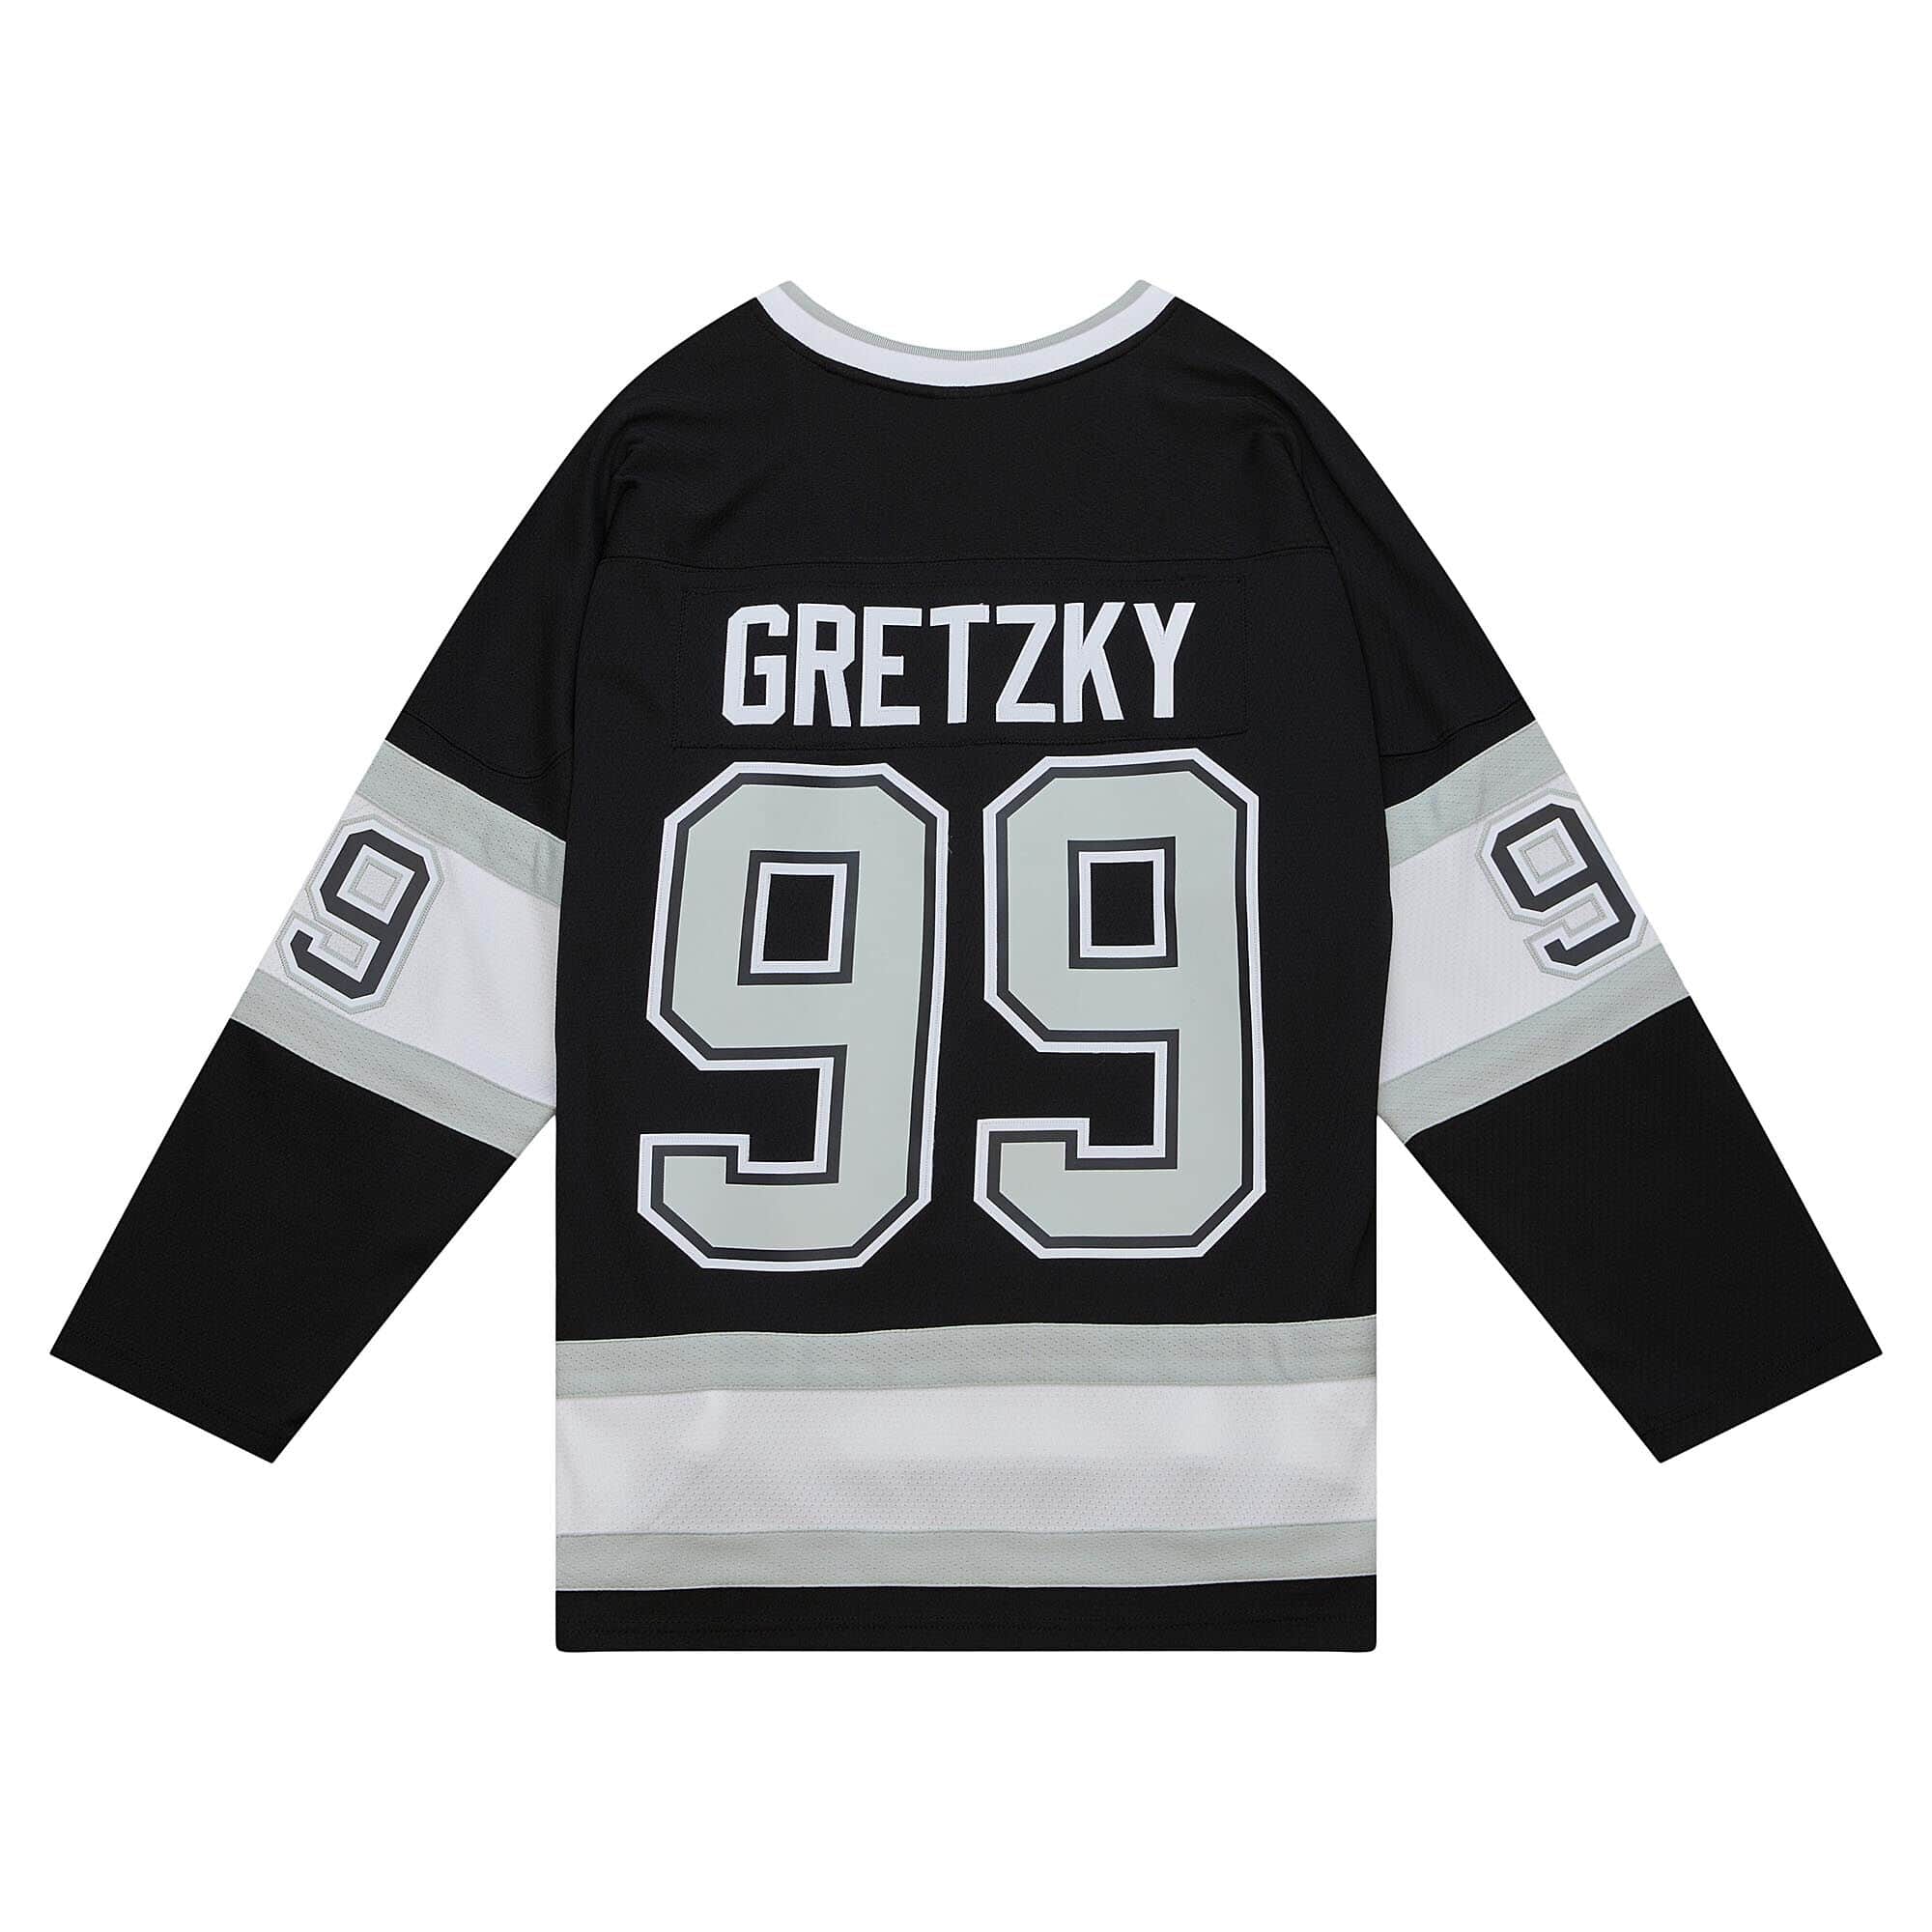 The Great one, Kings 90's alternate jersey